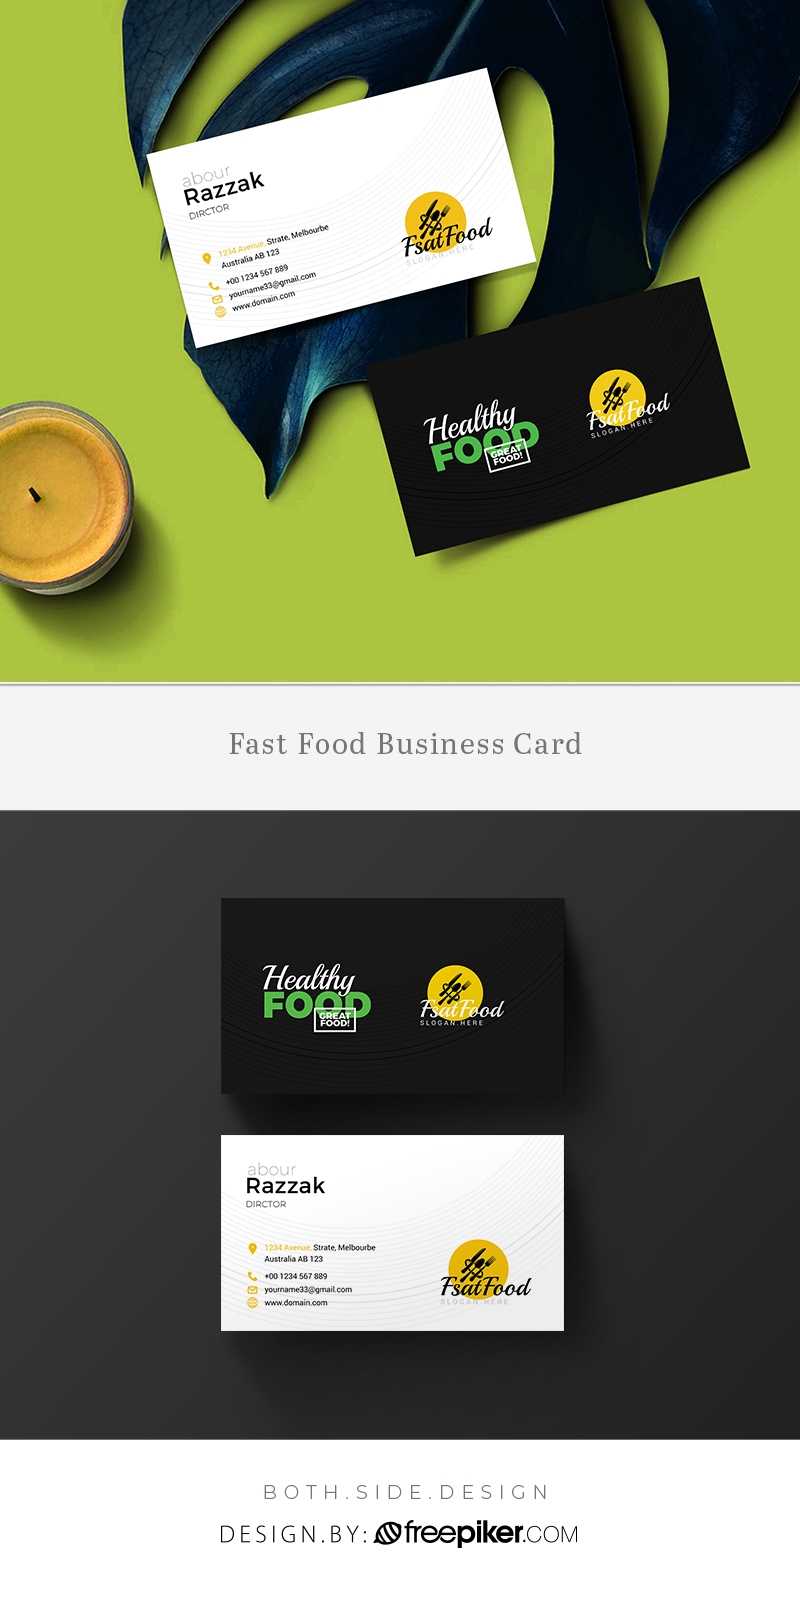 Freepiker | Food And Restaurant Business Card Template Intended For Food Business Cards Templates Free